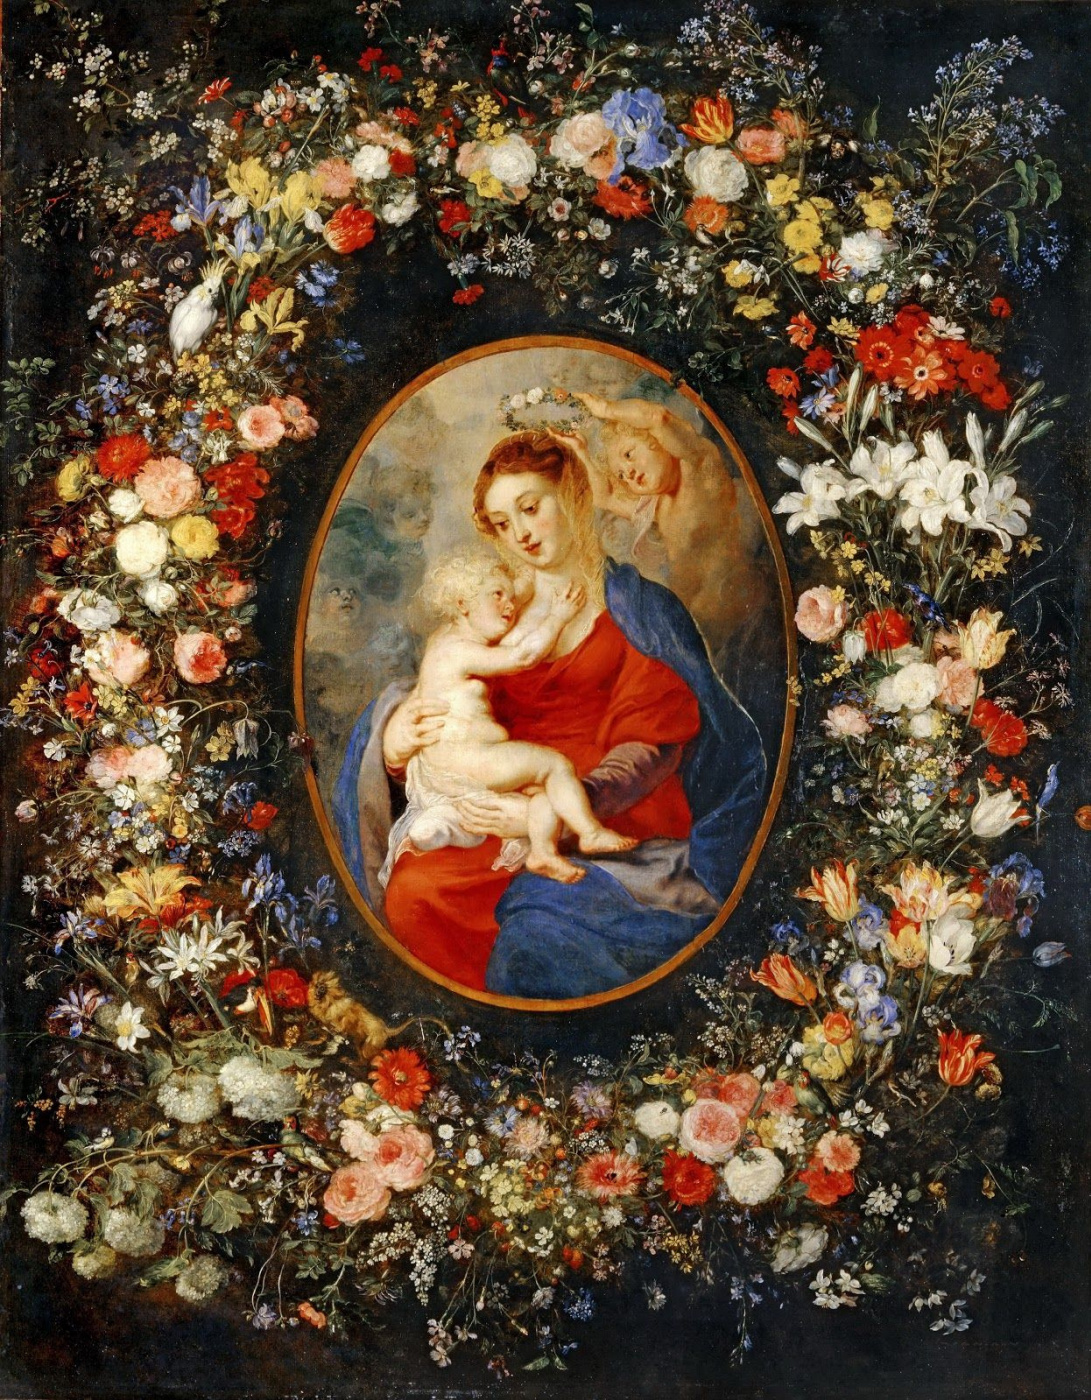 Peter Paul Rubens. The Madonna and child in a flower garland